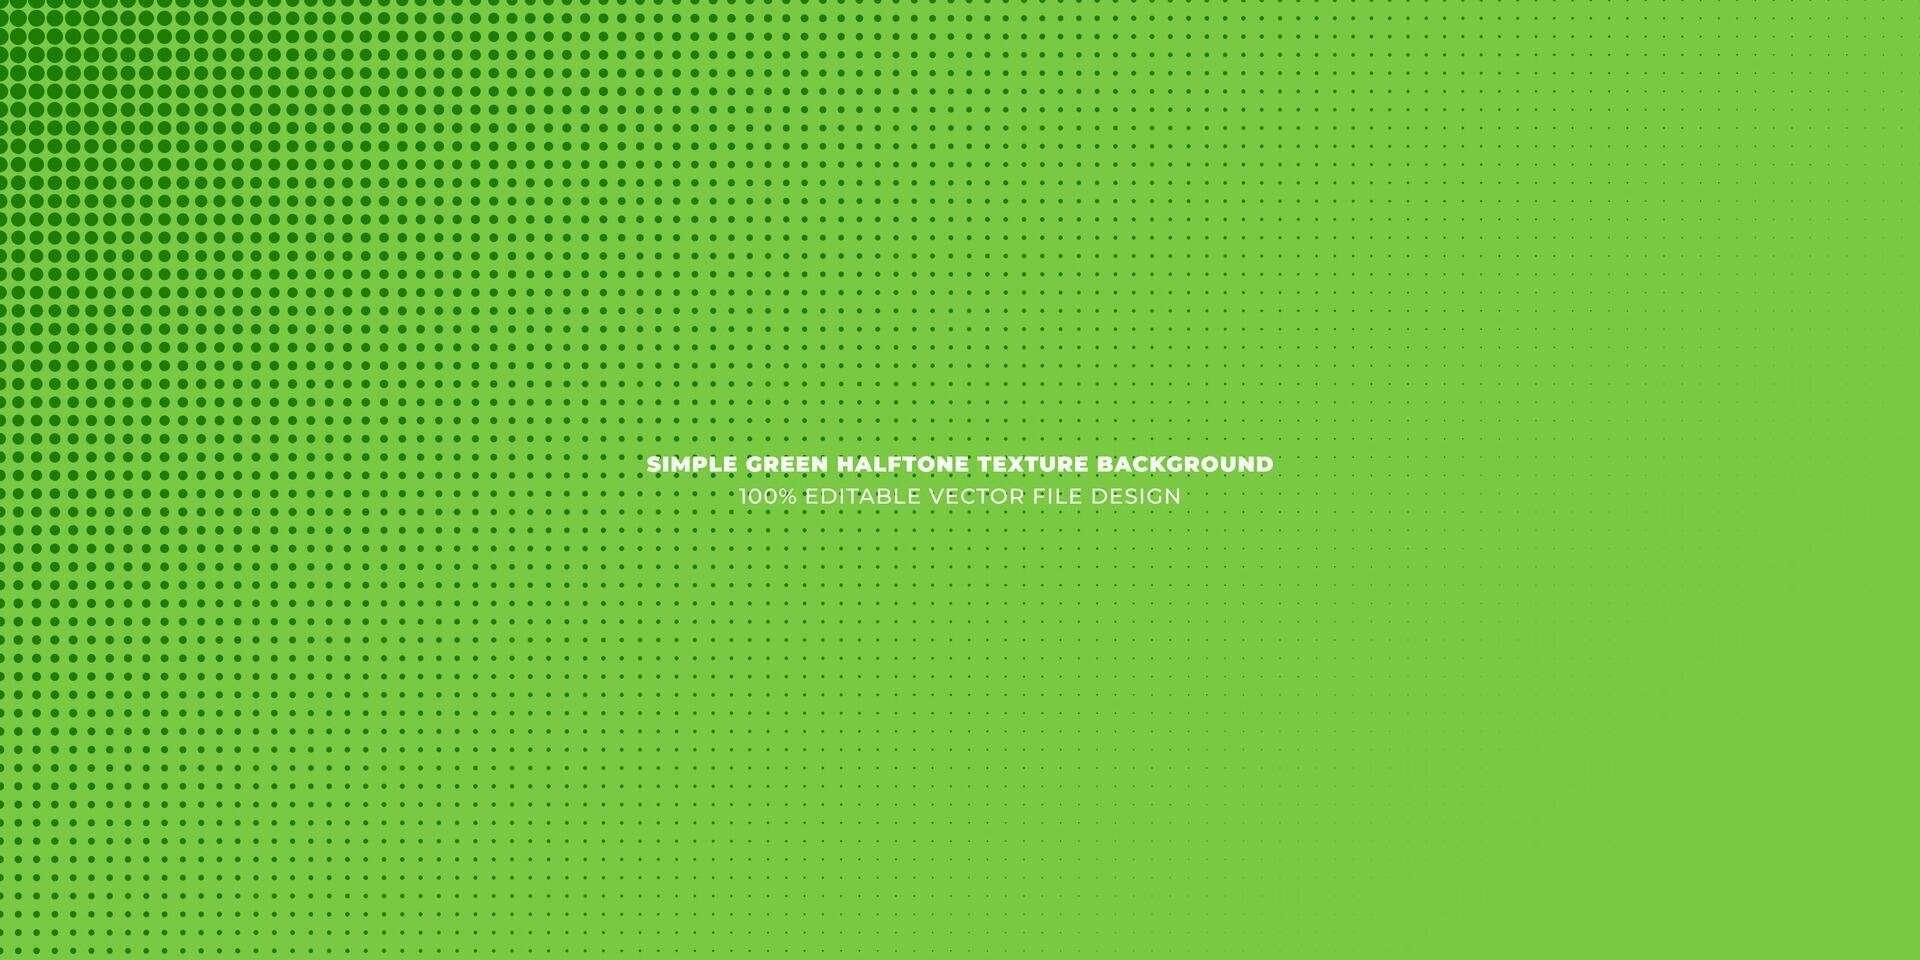 Simple Green Abstract Horizontal Background With Delicate Halftone Vector Texture